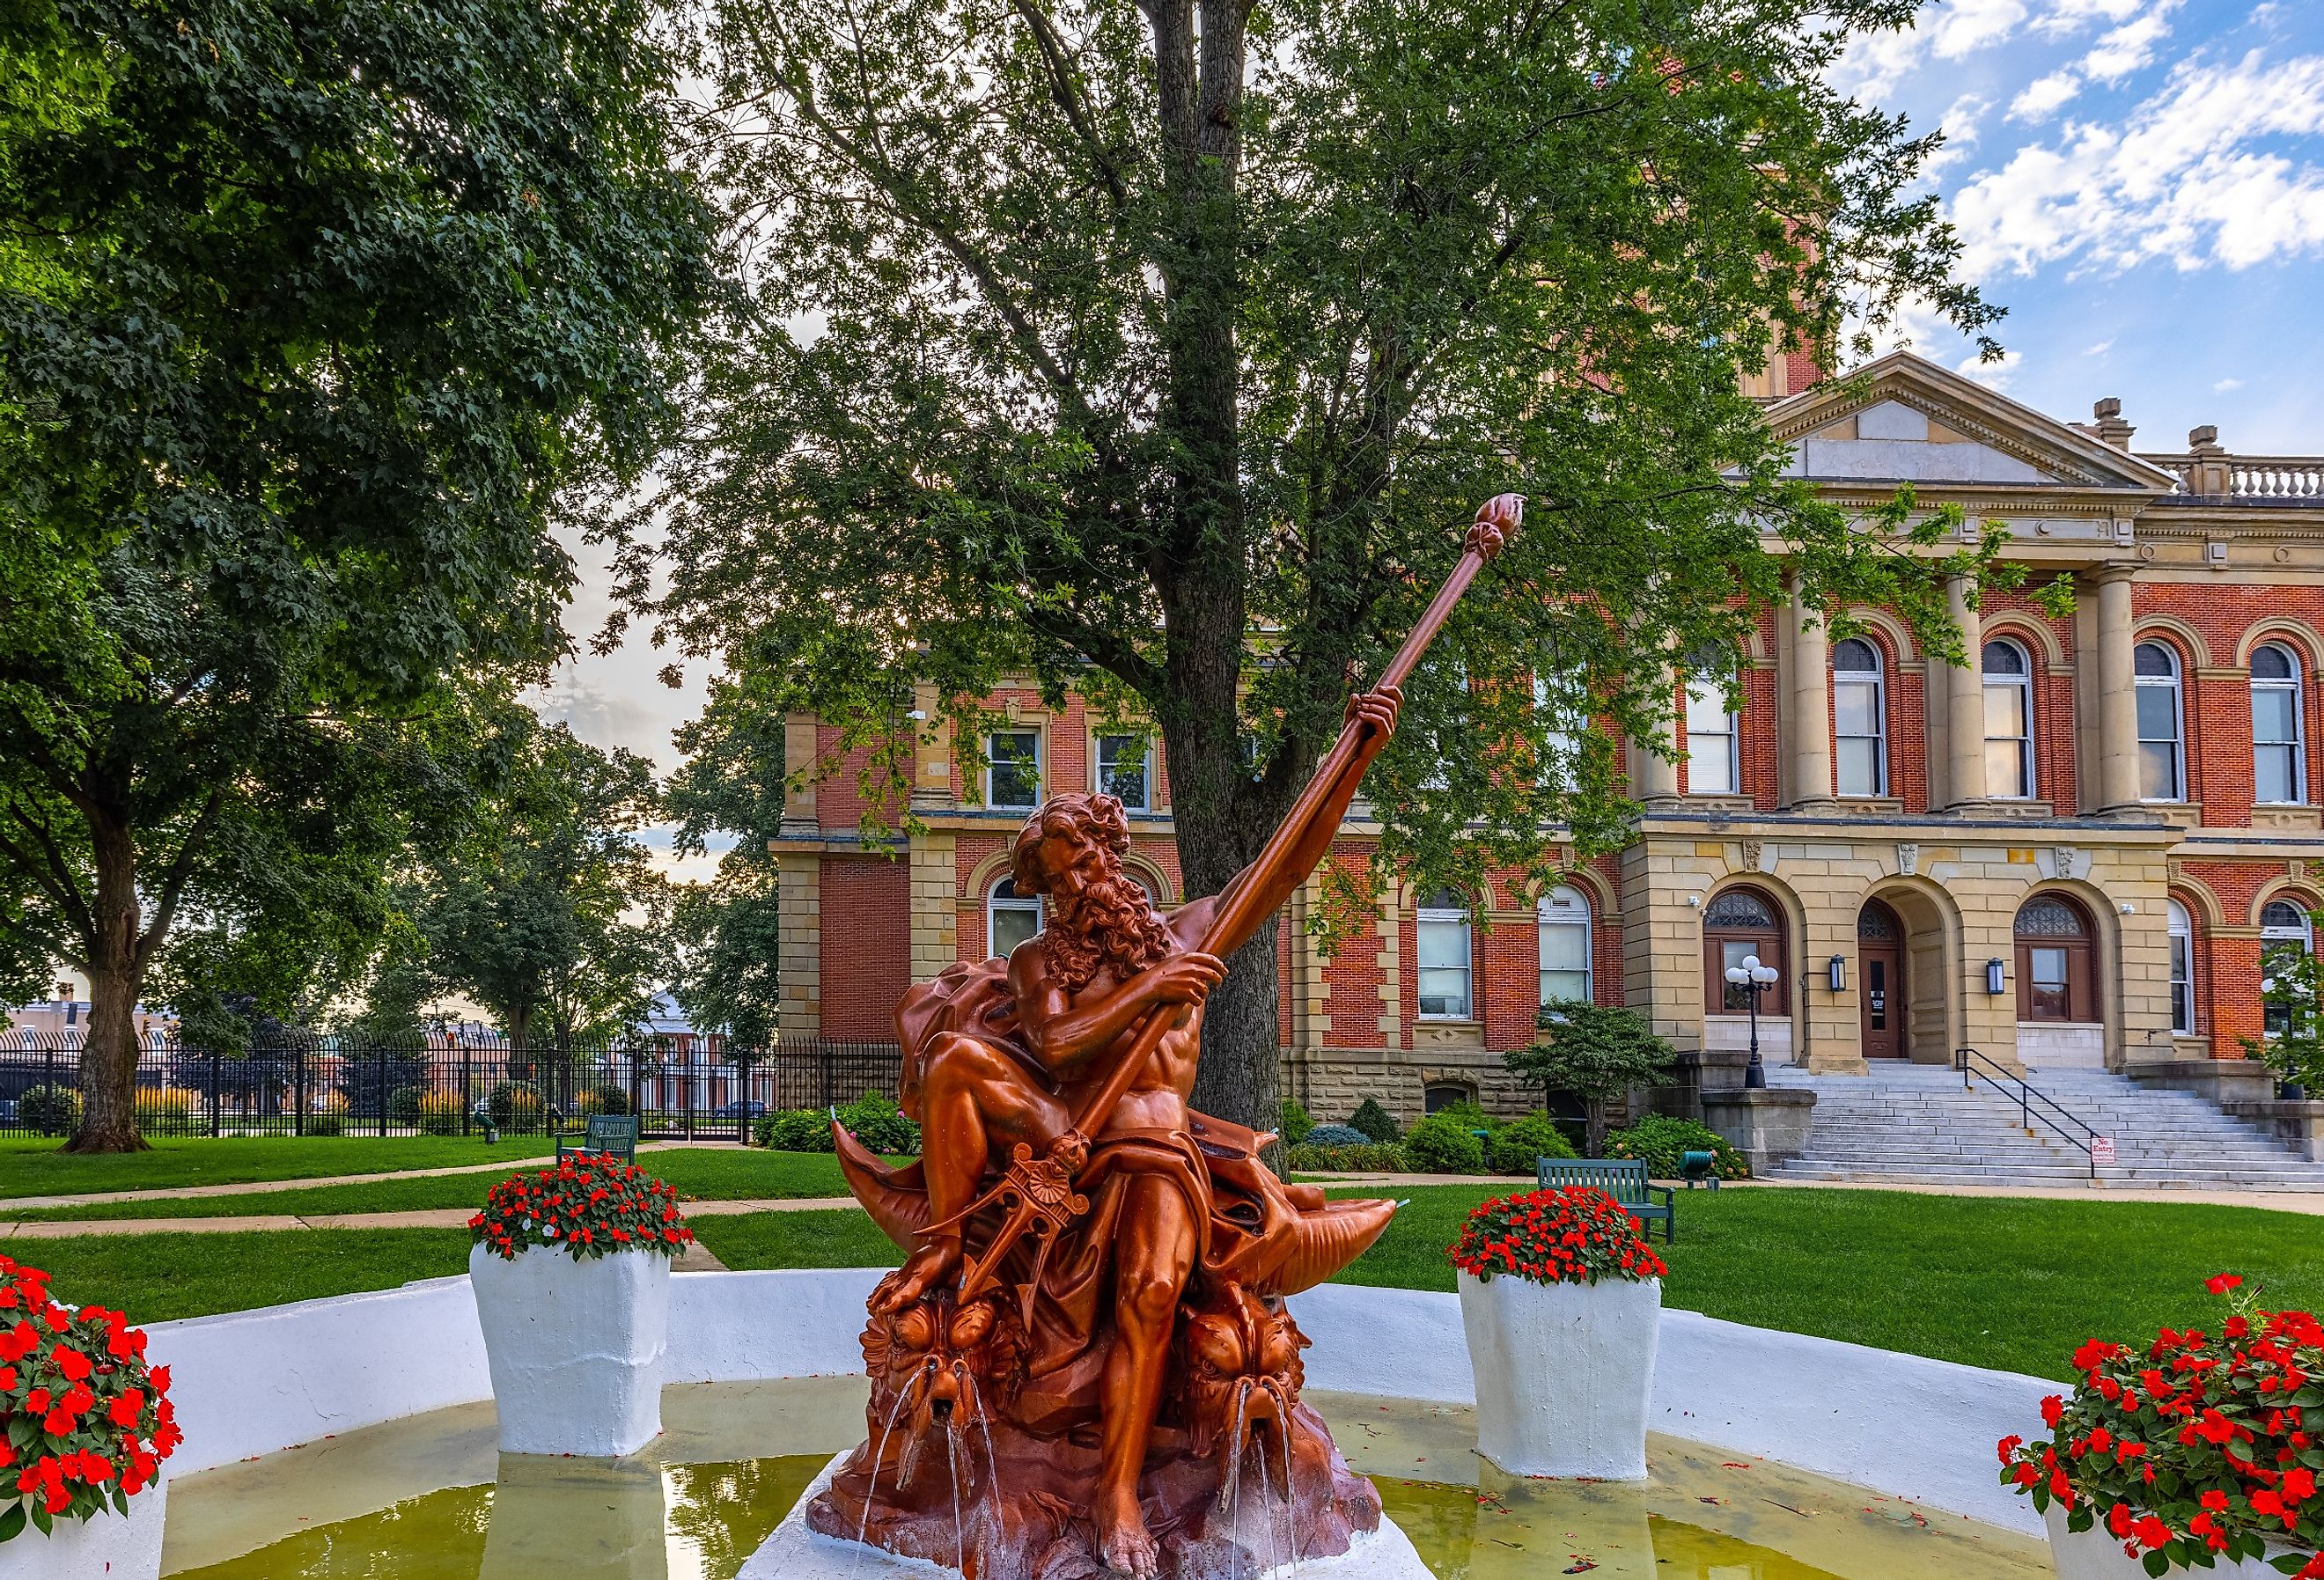 The Elkhart County Courthouse and it is Neptune Fountain. Image credit Roberto Galan via Shutterstock